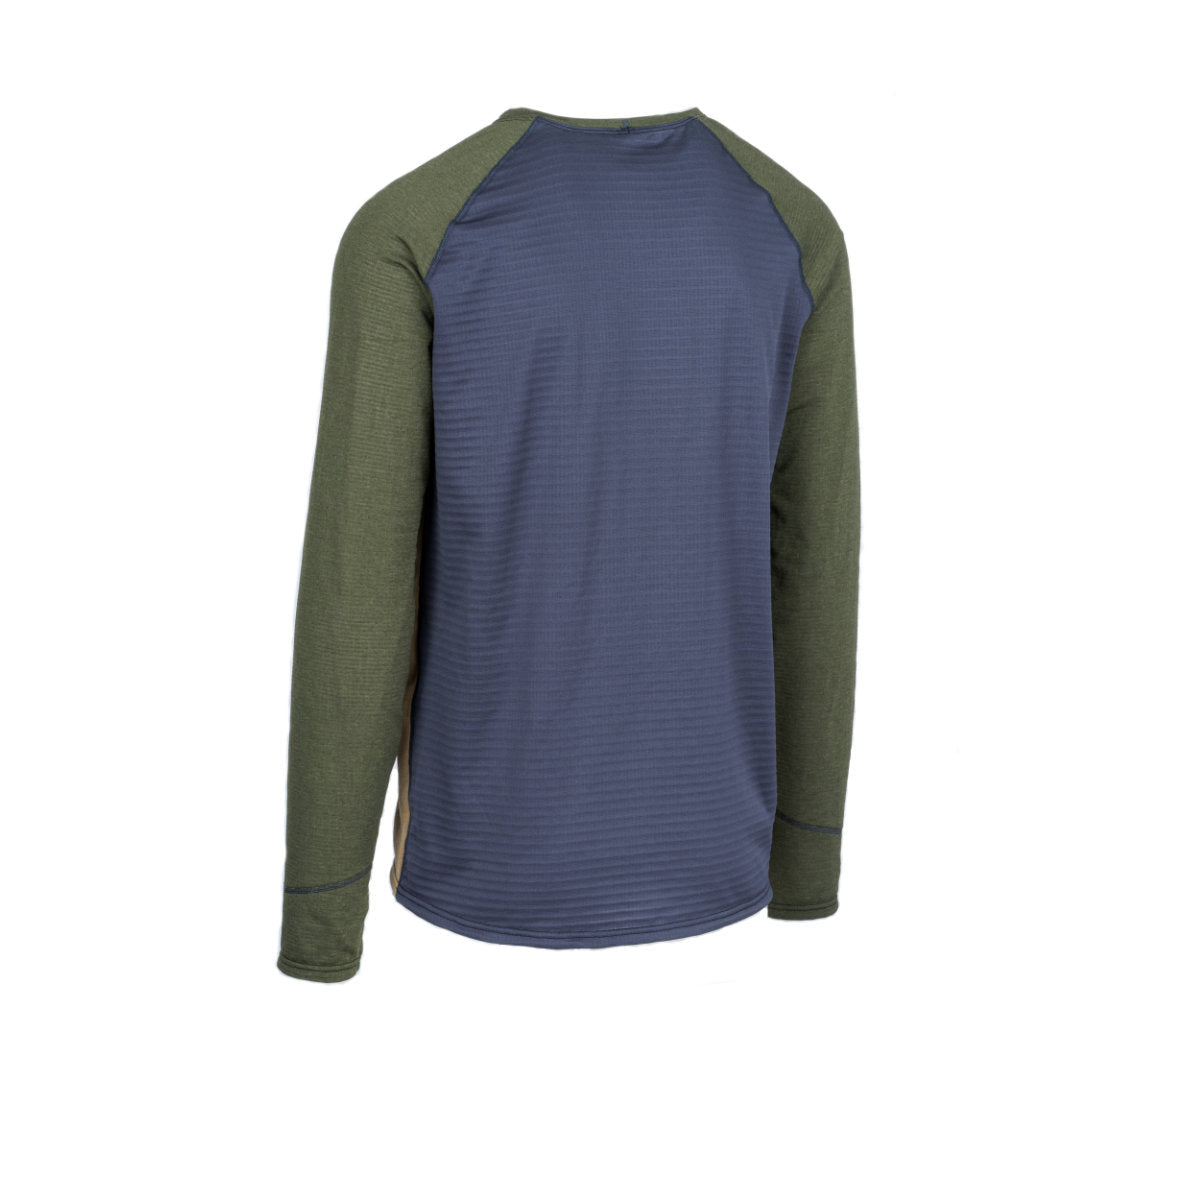 – Immersion Polartec® Research Research | Baseline Immersion Crewneck Shirt